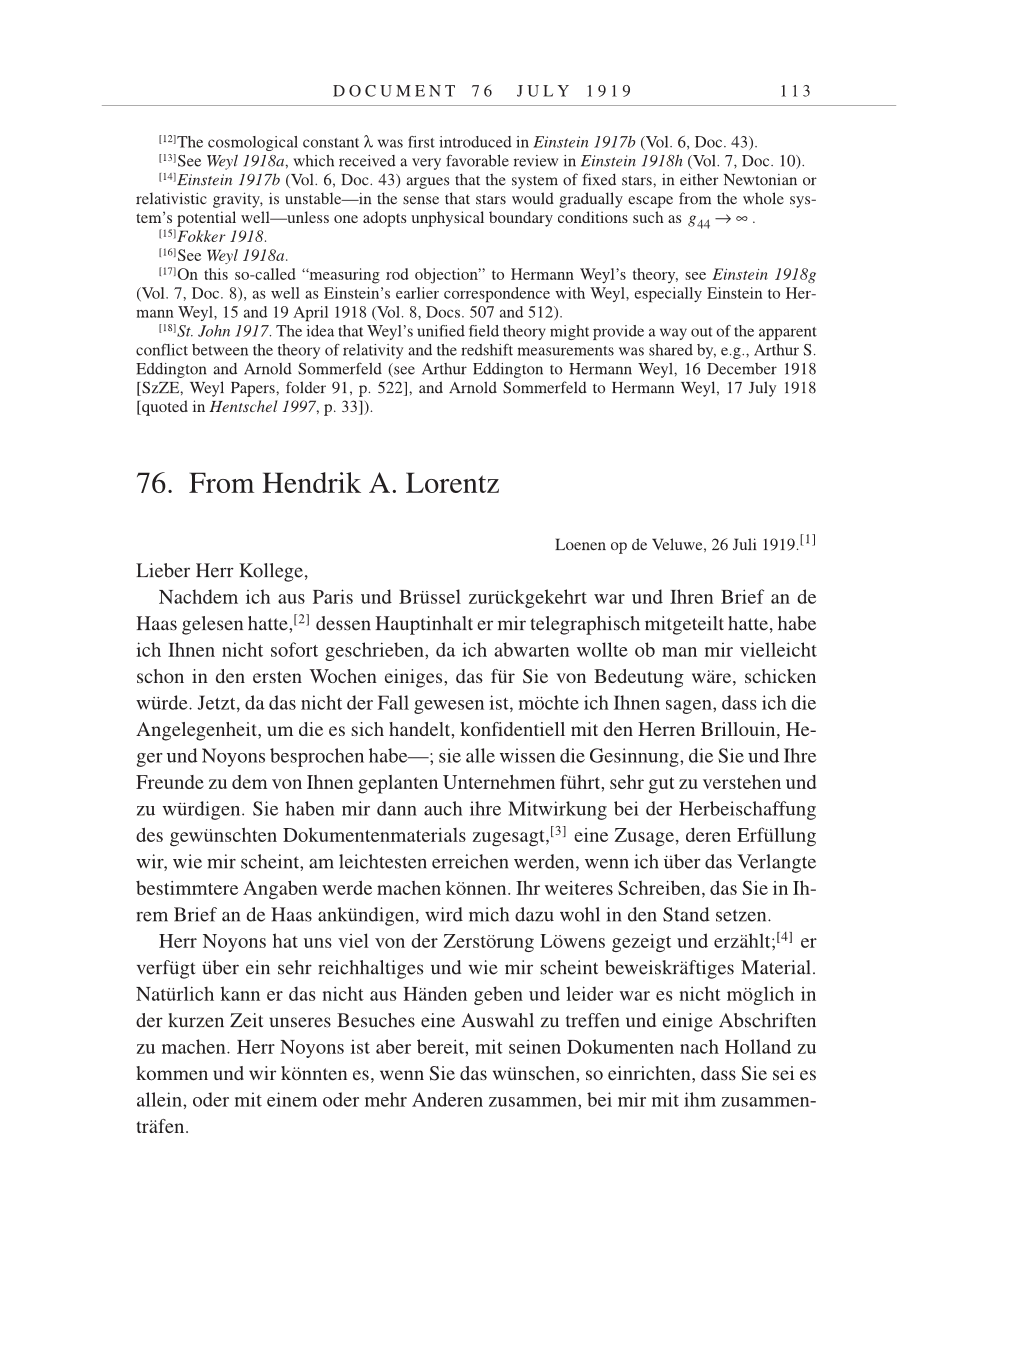 Volume 9: The Berlin Years: Correspondence January 1919-April 1920 page 113